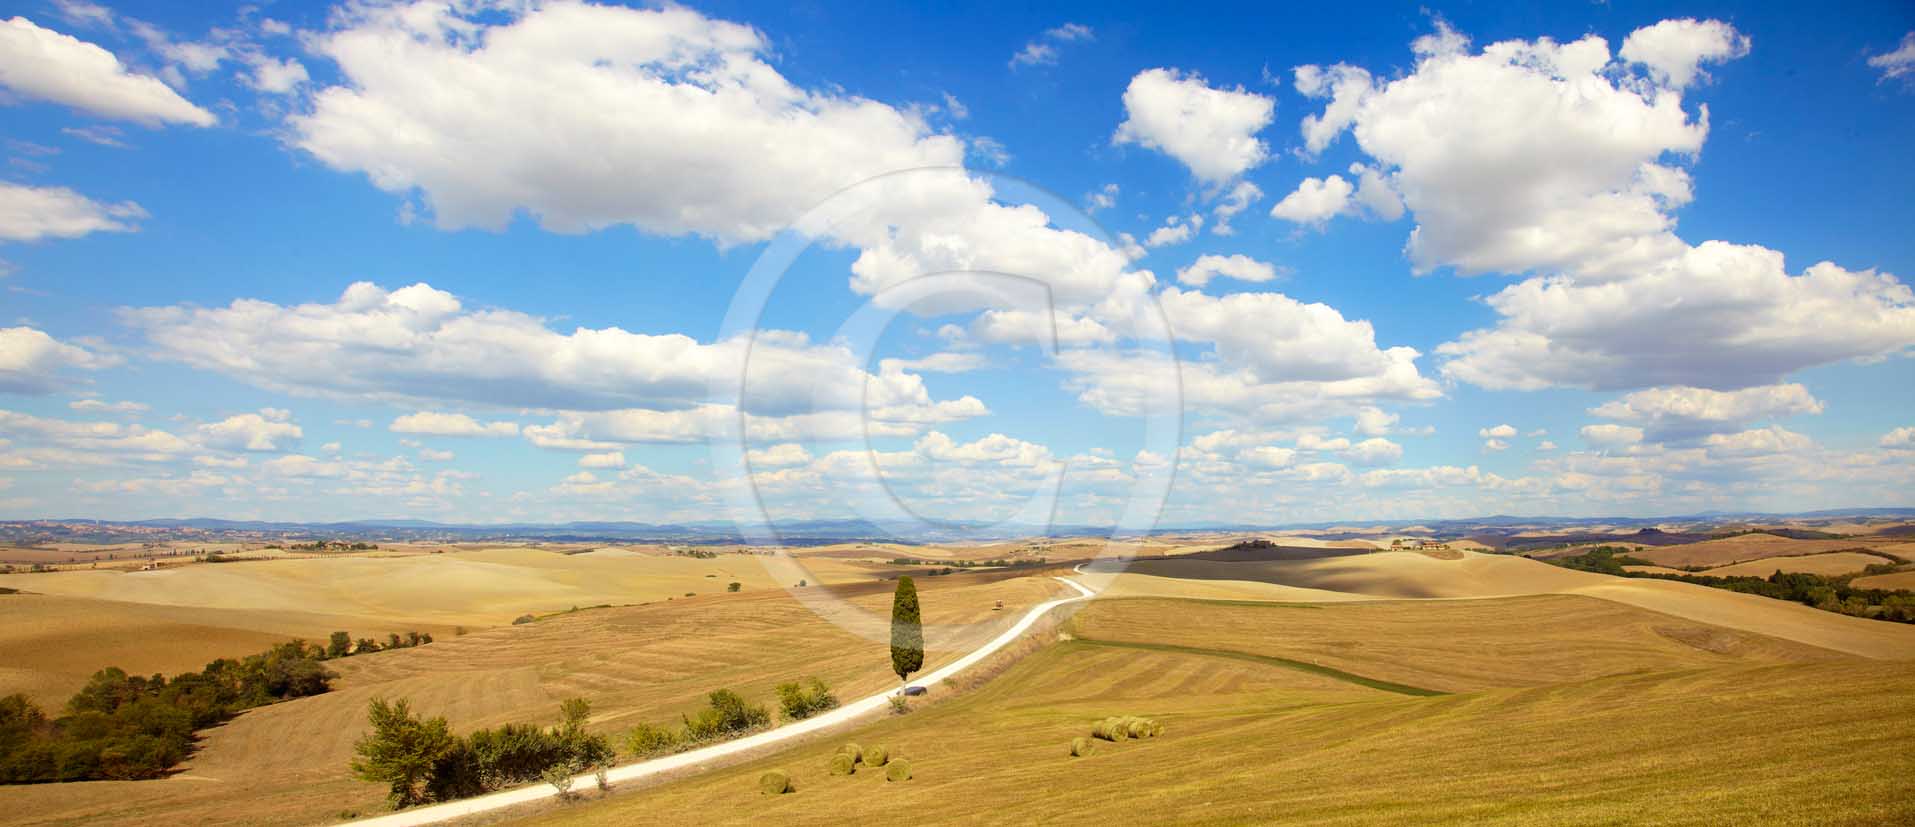 2011 - Panoramic view of cypress and country road near Ville di Corsano in Crete Senesi land.